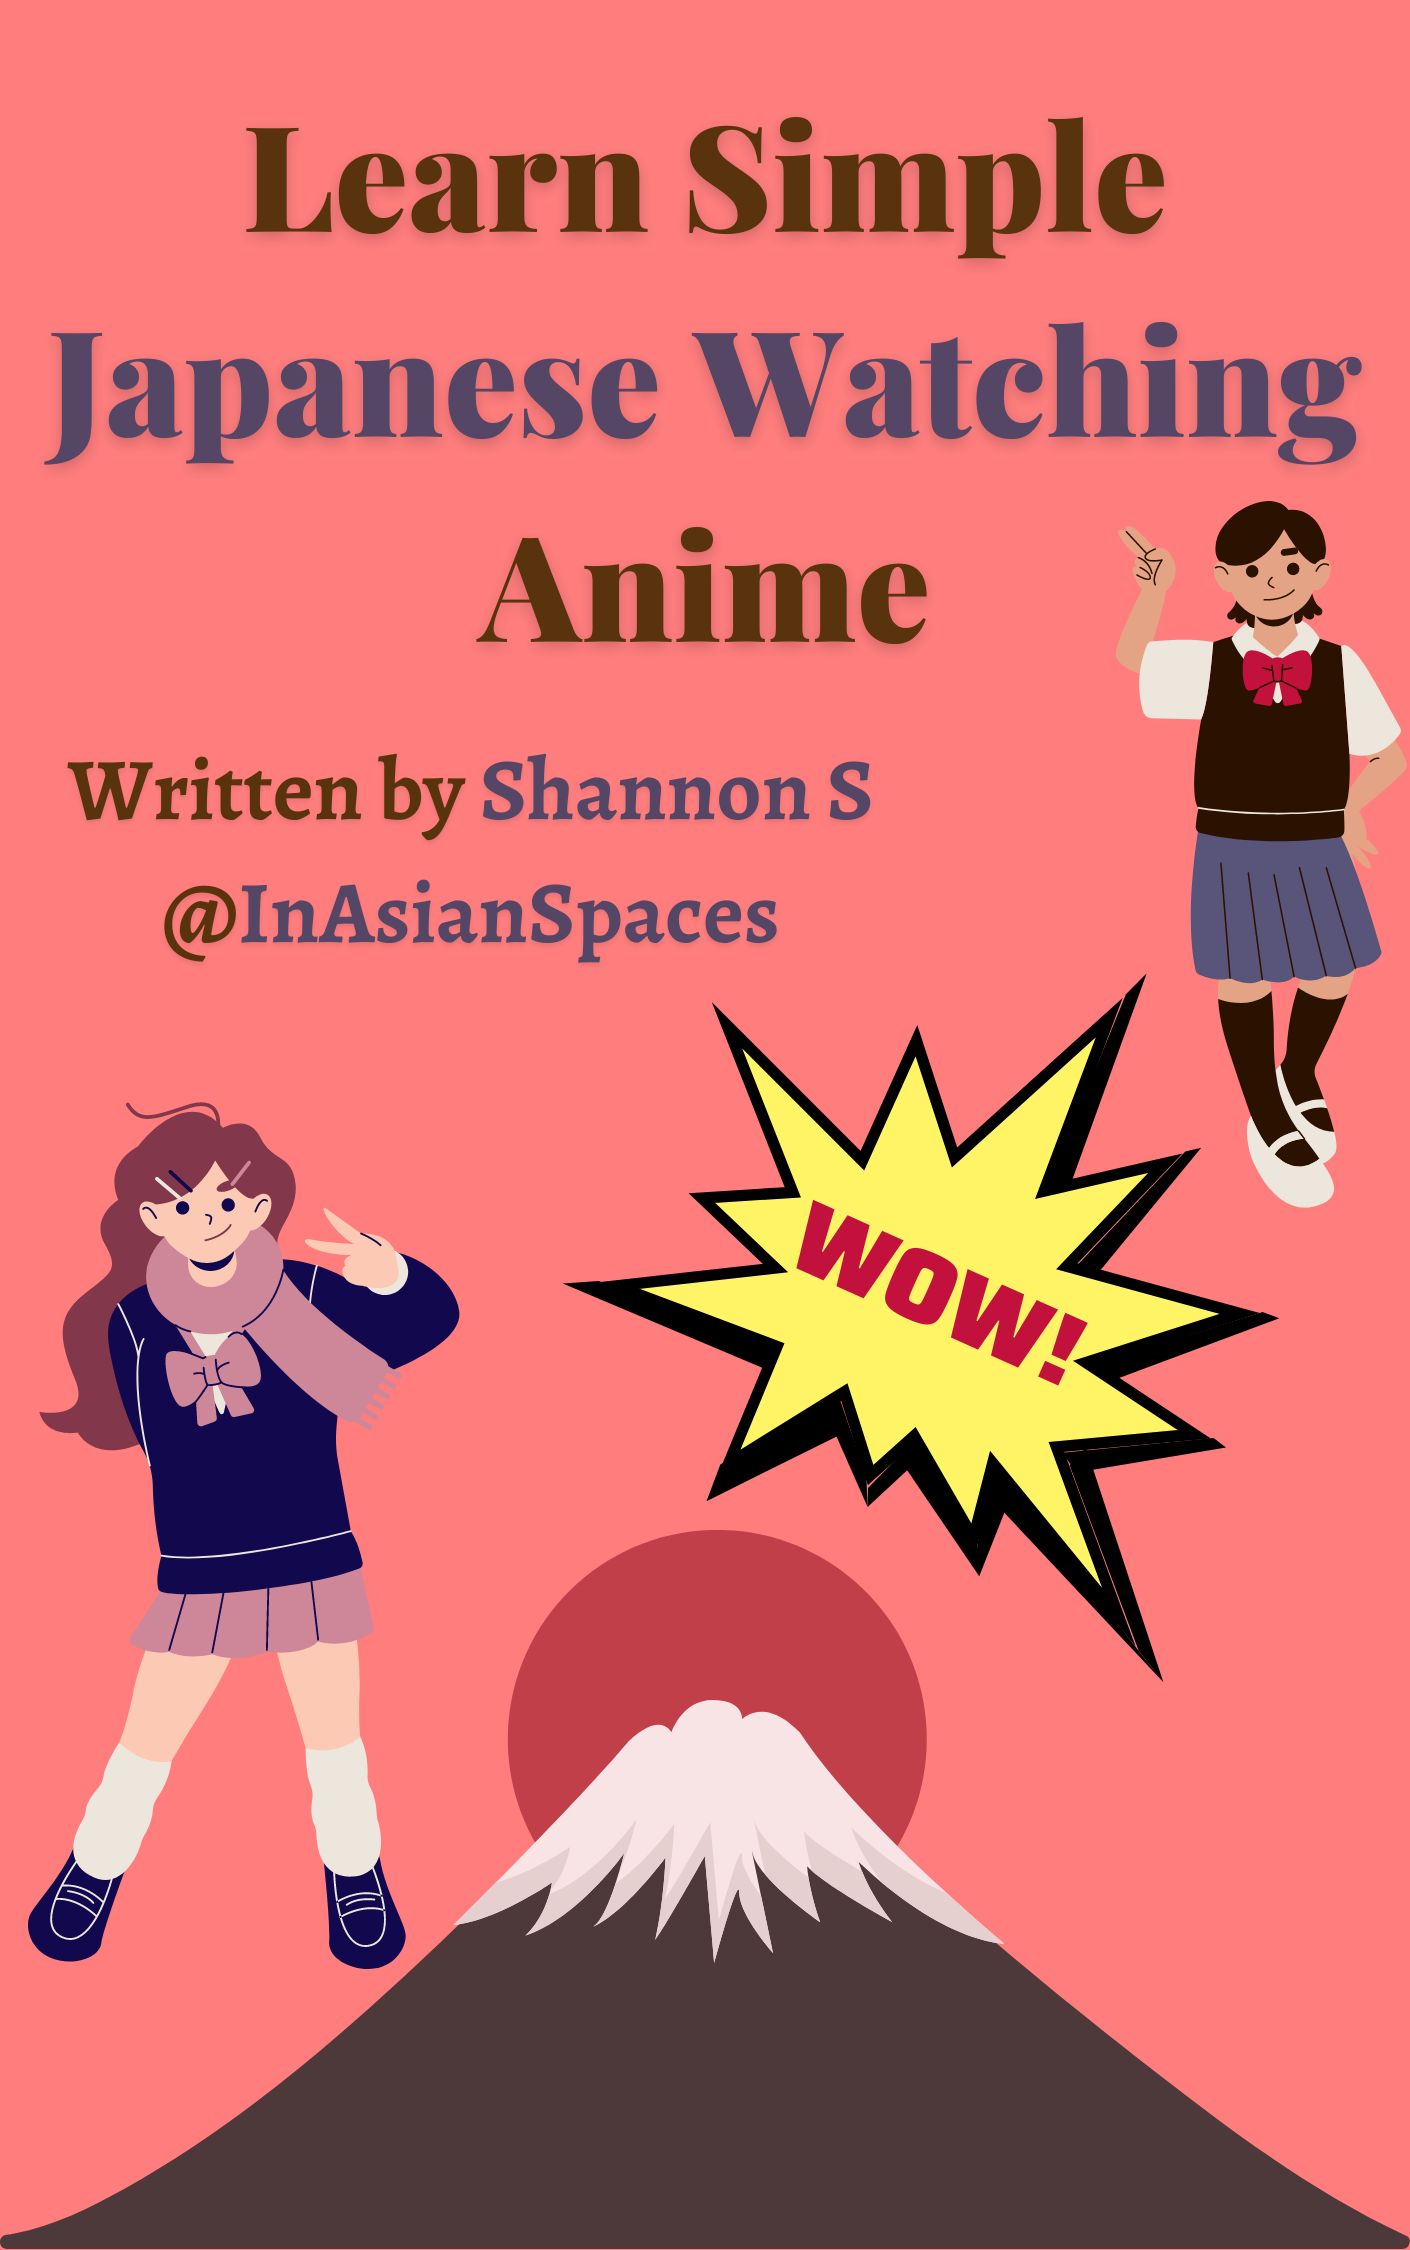 Learn Simple Japanese Watching Anime